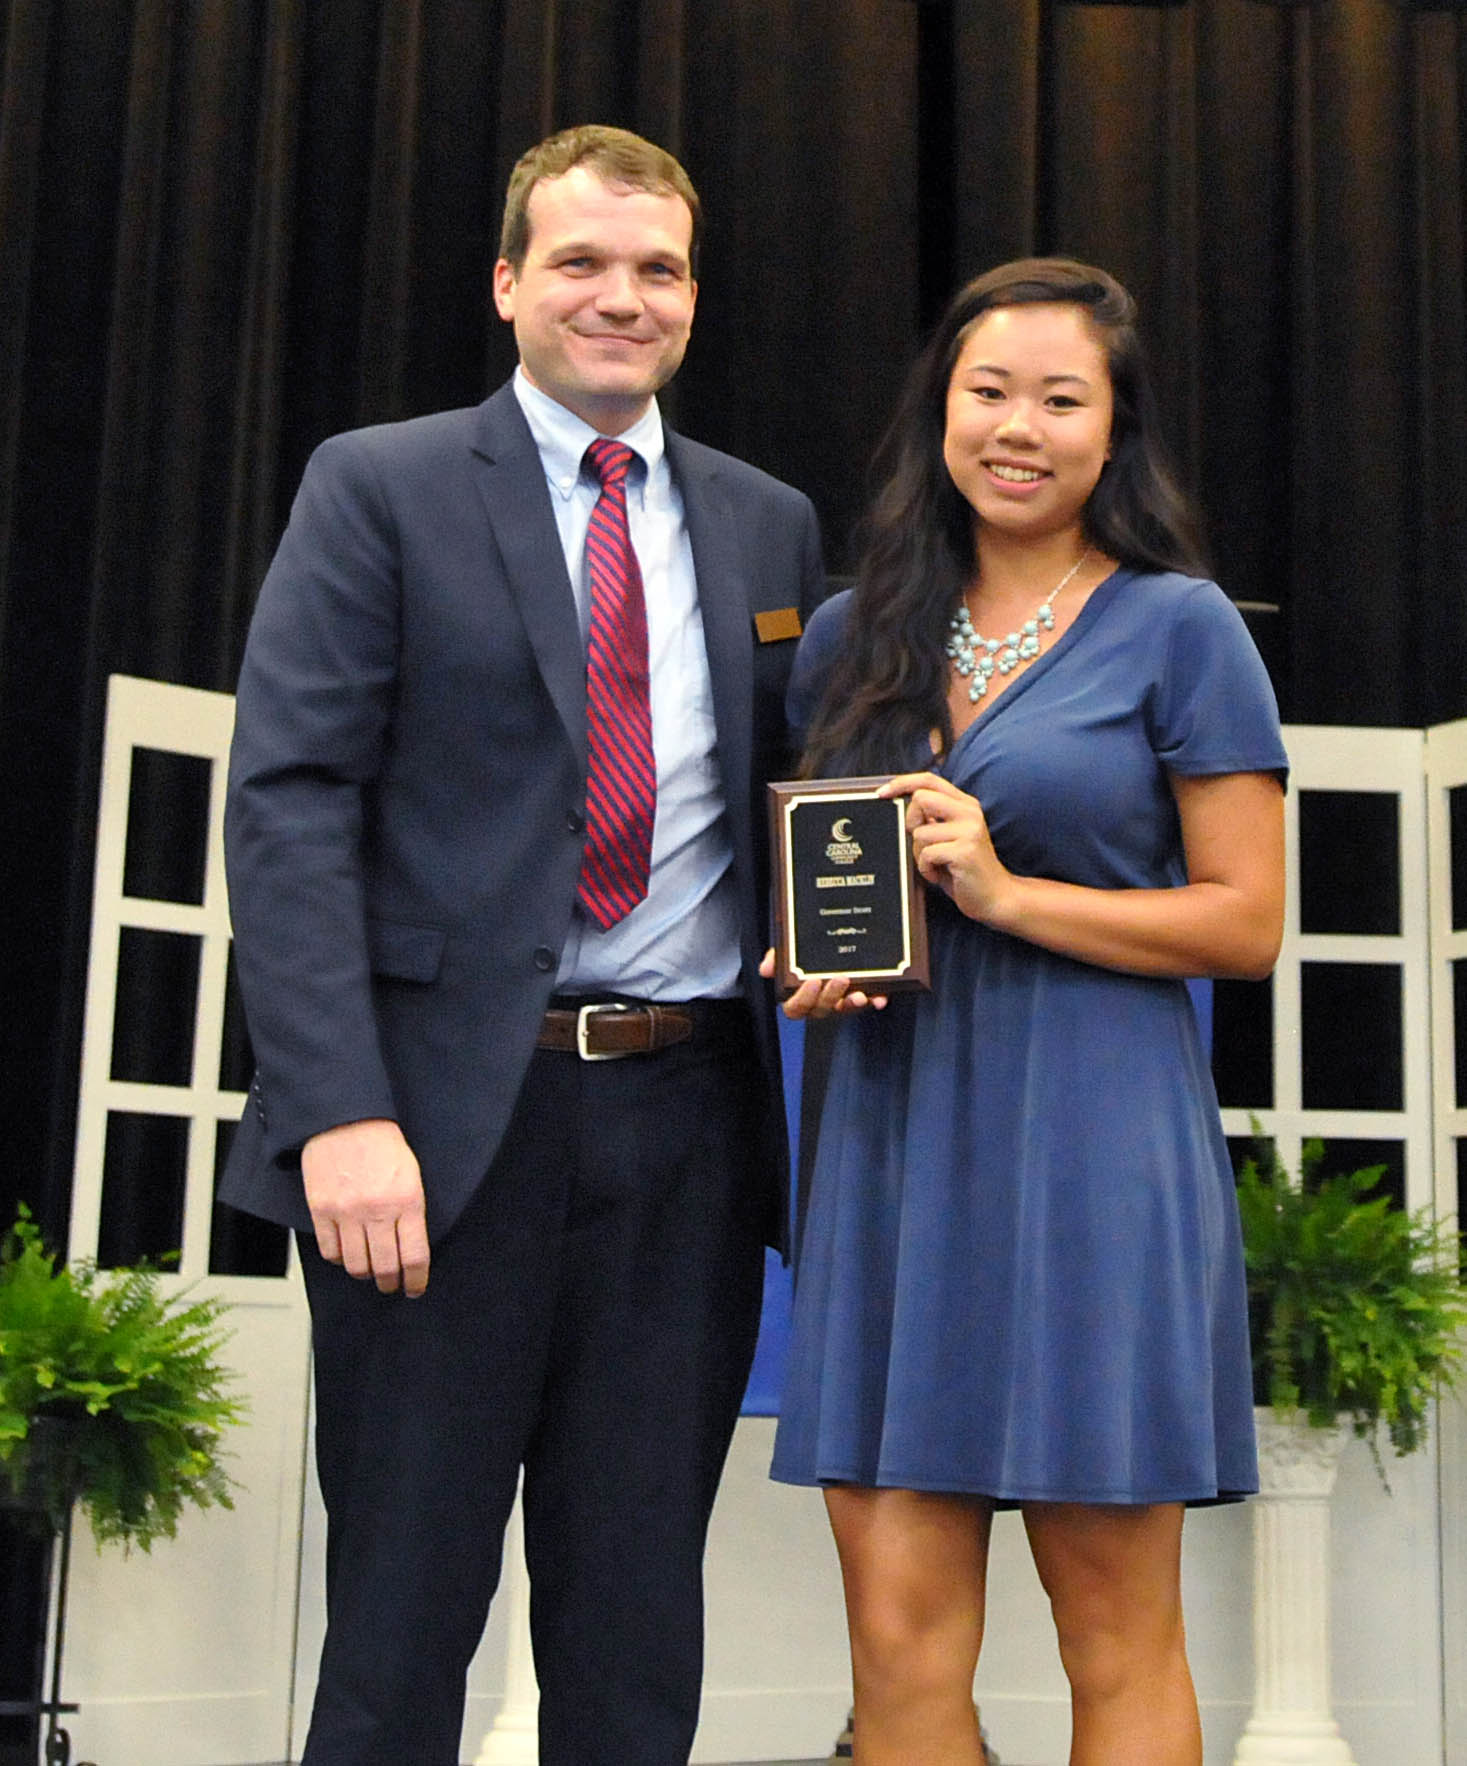 Excellence honored at CCCC awards program